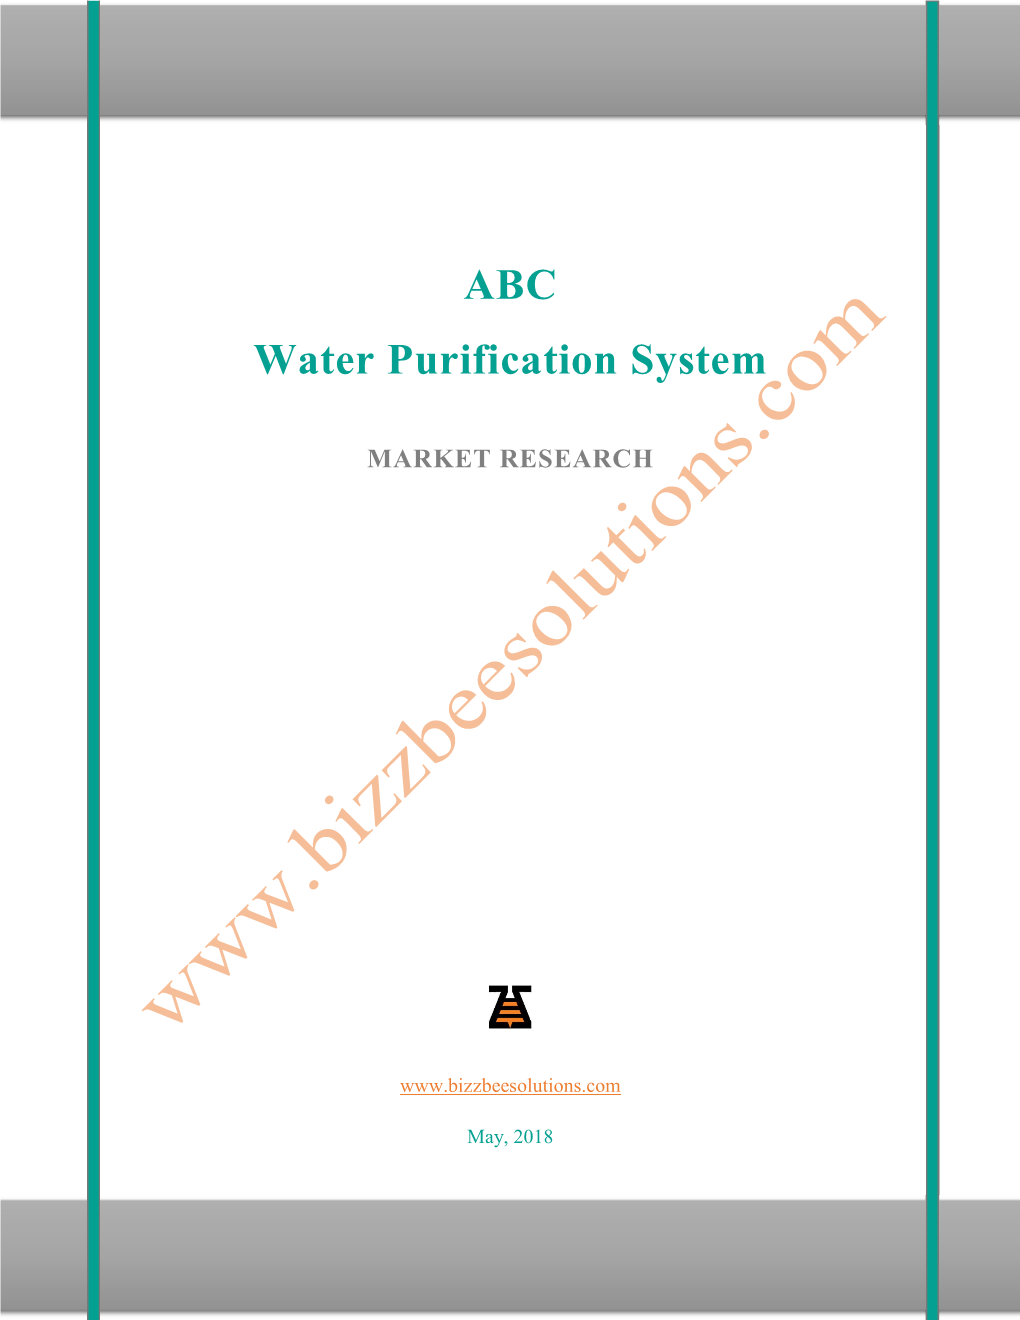 ABC Water Purification System